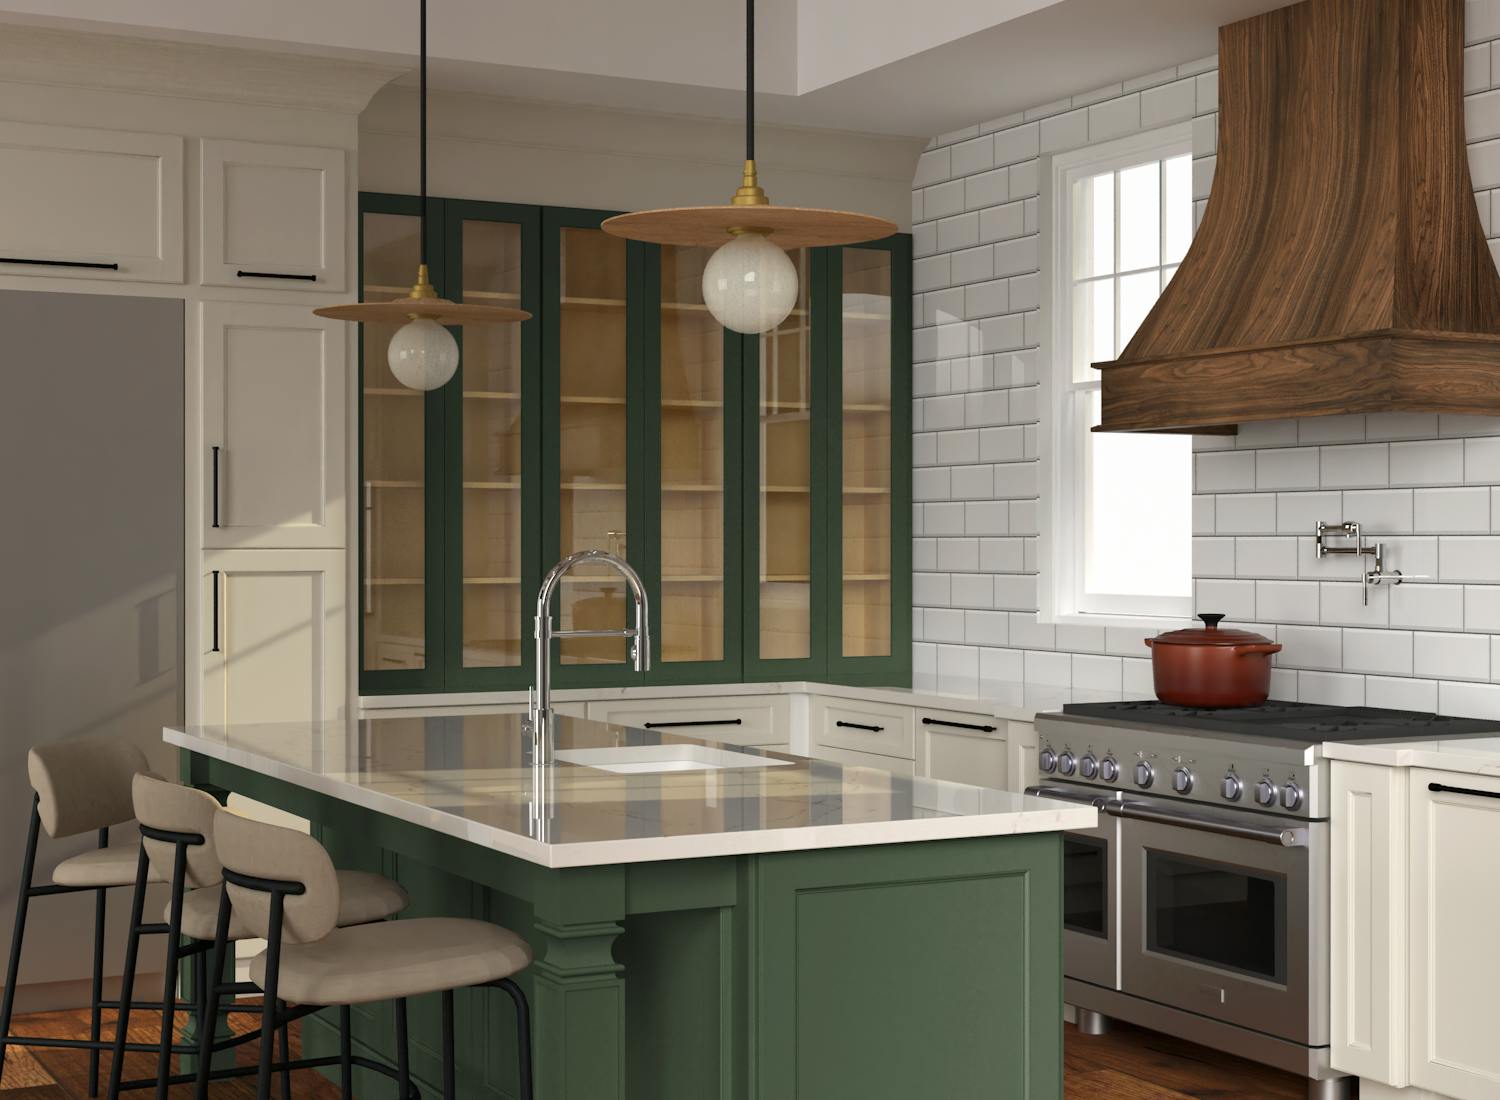 Green kitchen island cabinets with white countertop